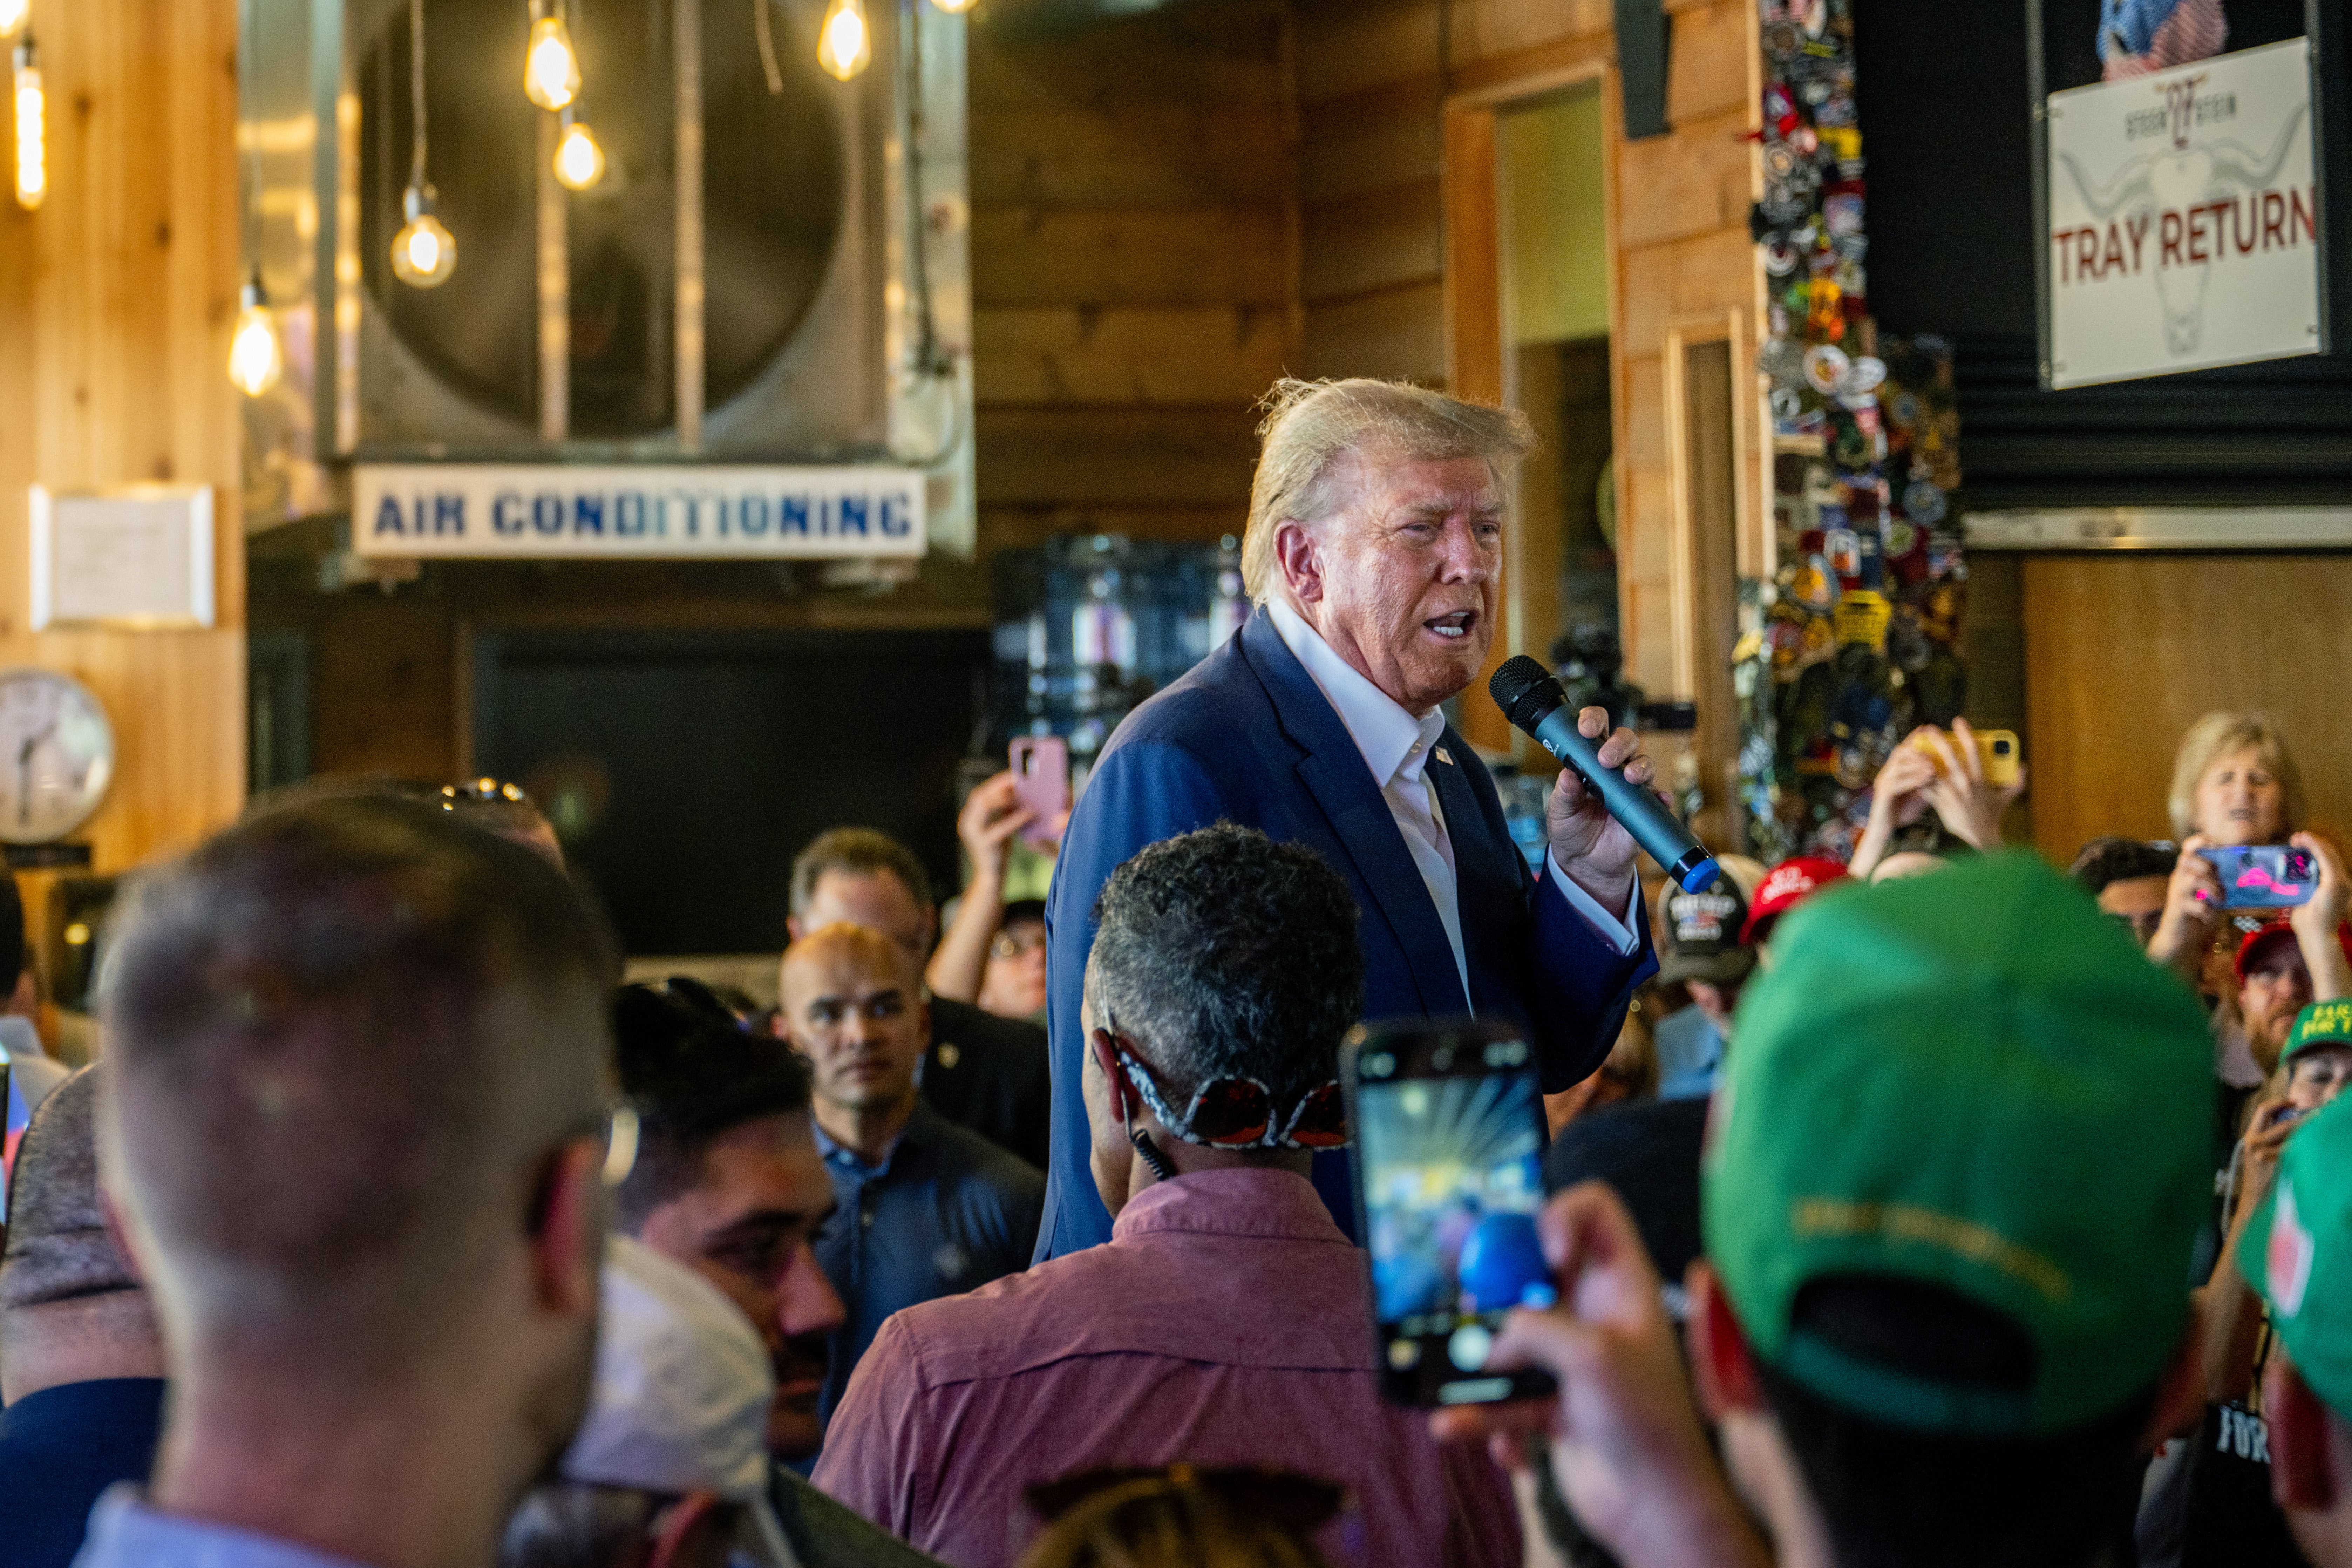 Donald Trump speaks during a rally at the Steer N' Stein bar at the Iowa State Fair on August 12, 2023 in Des Moines, Iowa.